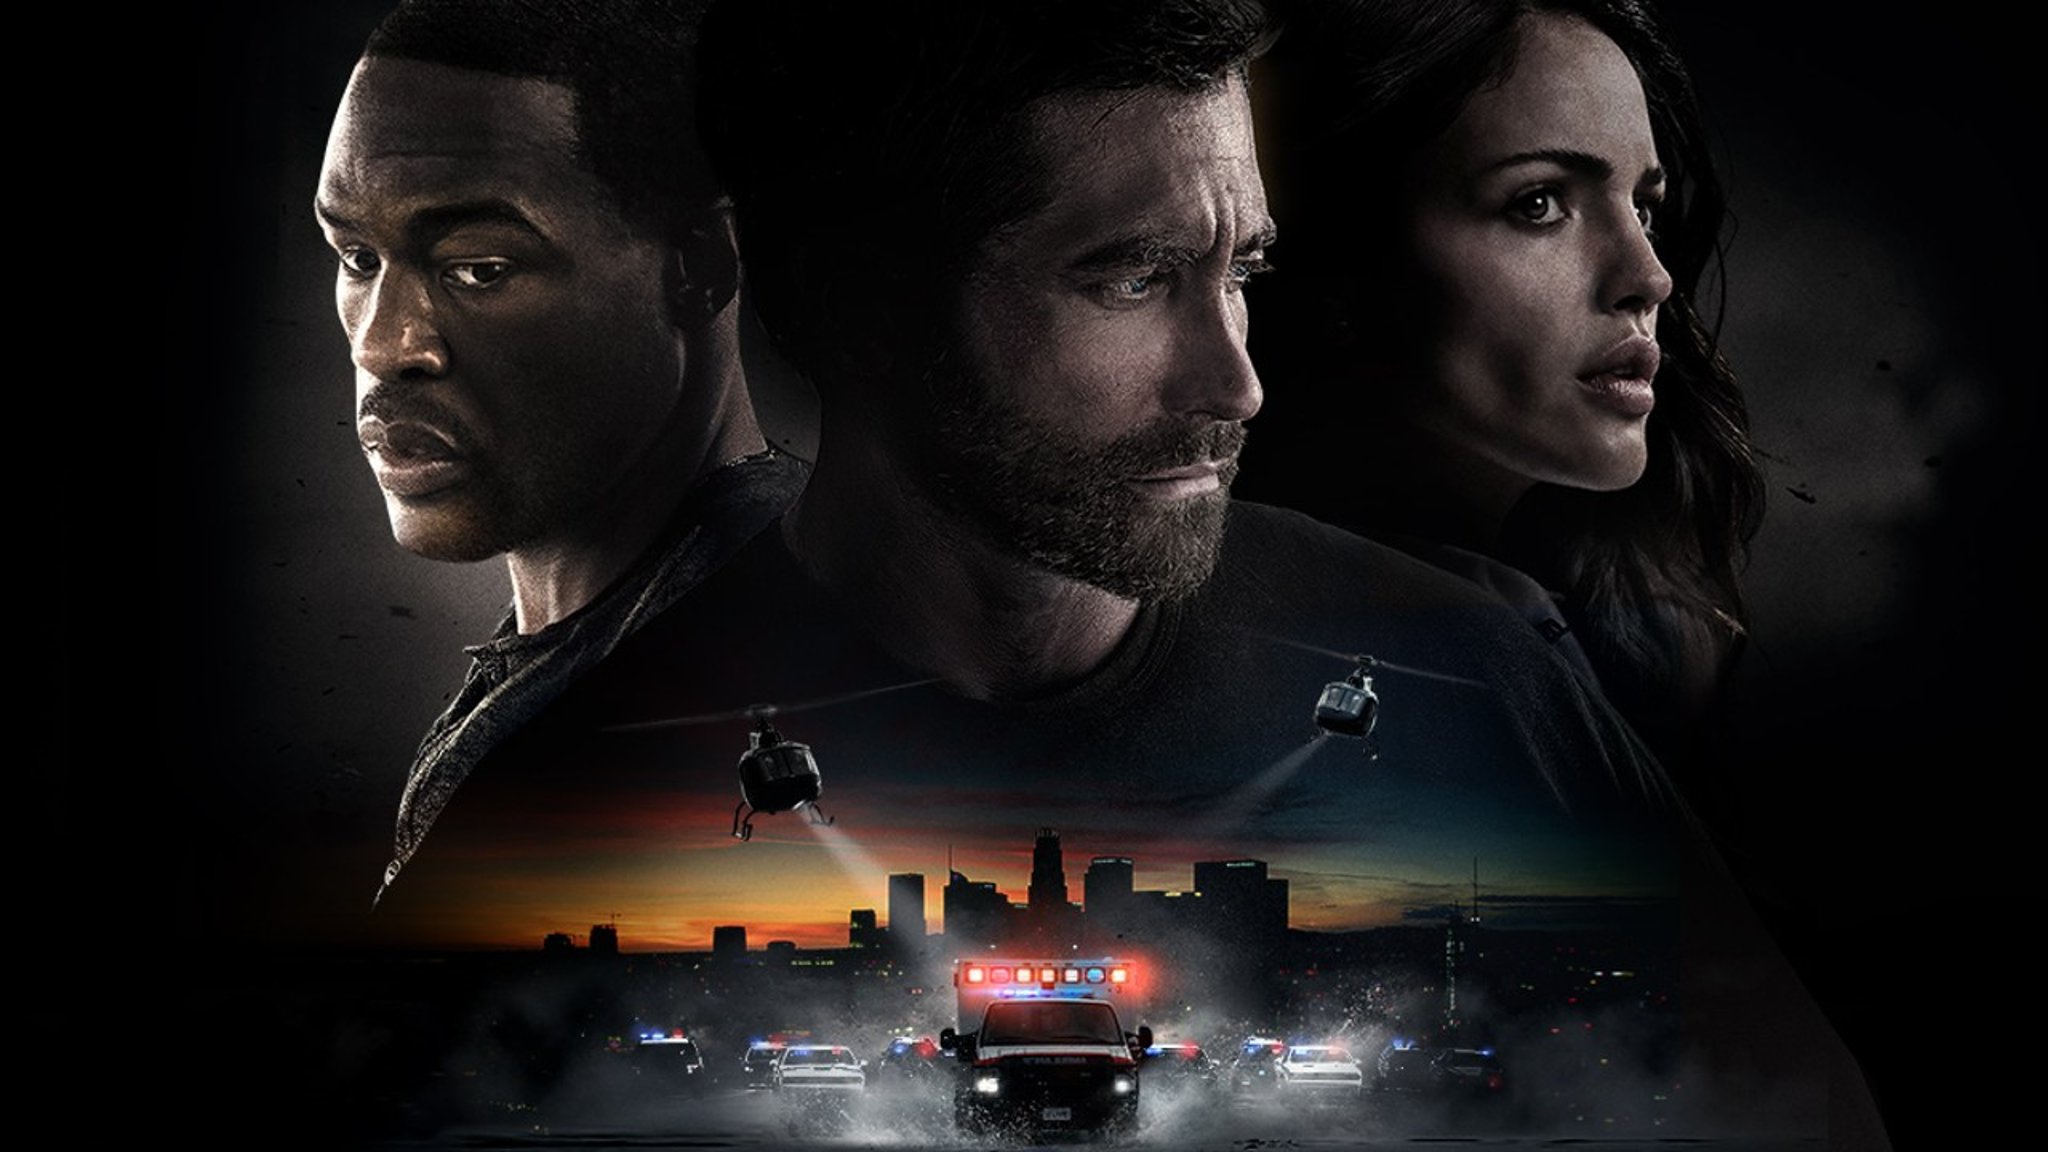 Ambulance movie 2022: Michael Bay film release date, who's in the cast with Jake Gyllenhaal